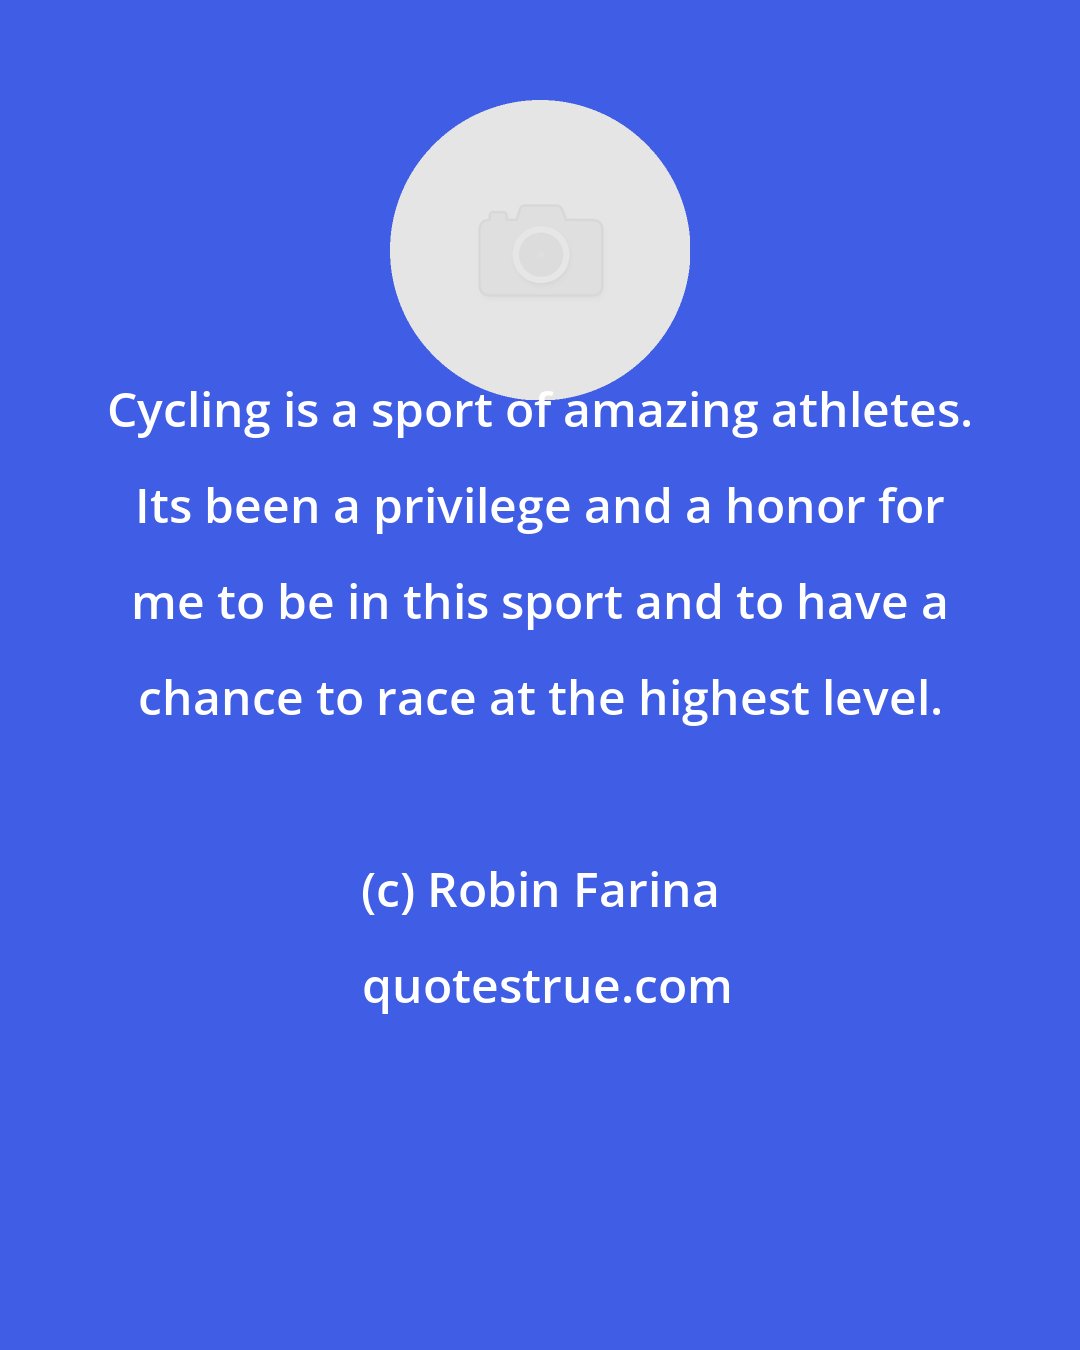 Robin Farina: Cycling is a sport of amazing athletes. Its been a privilege and a honor for me to be in this sport and to have a chance to race at the highest level.